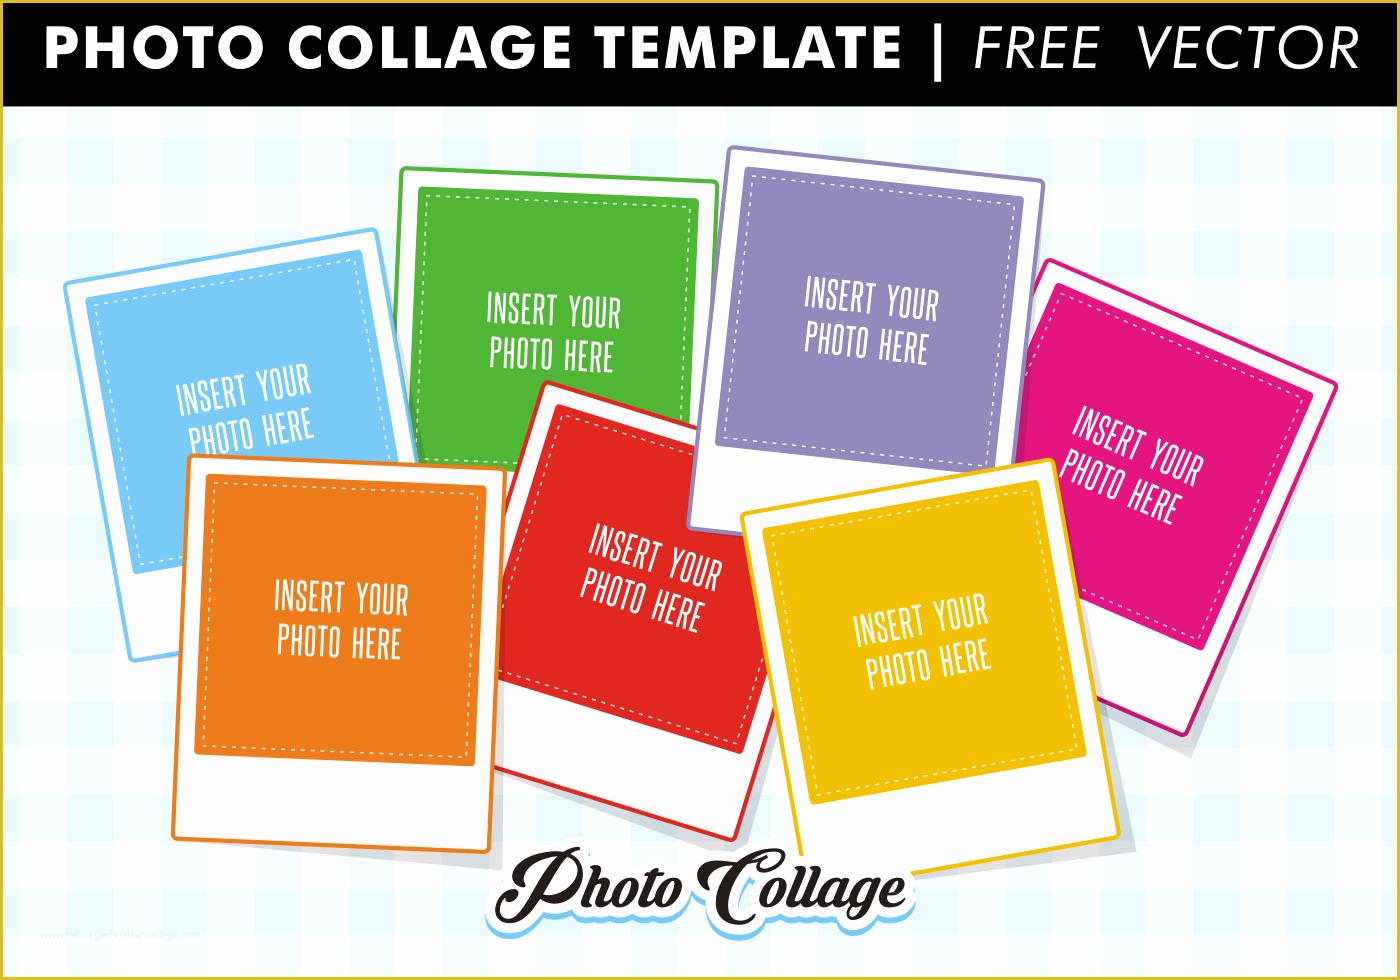 Free Photo Templates Of Collage Templates Free Vector Download Free Vector